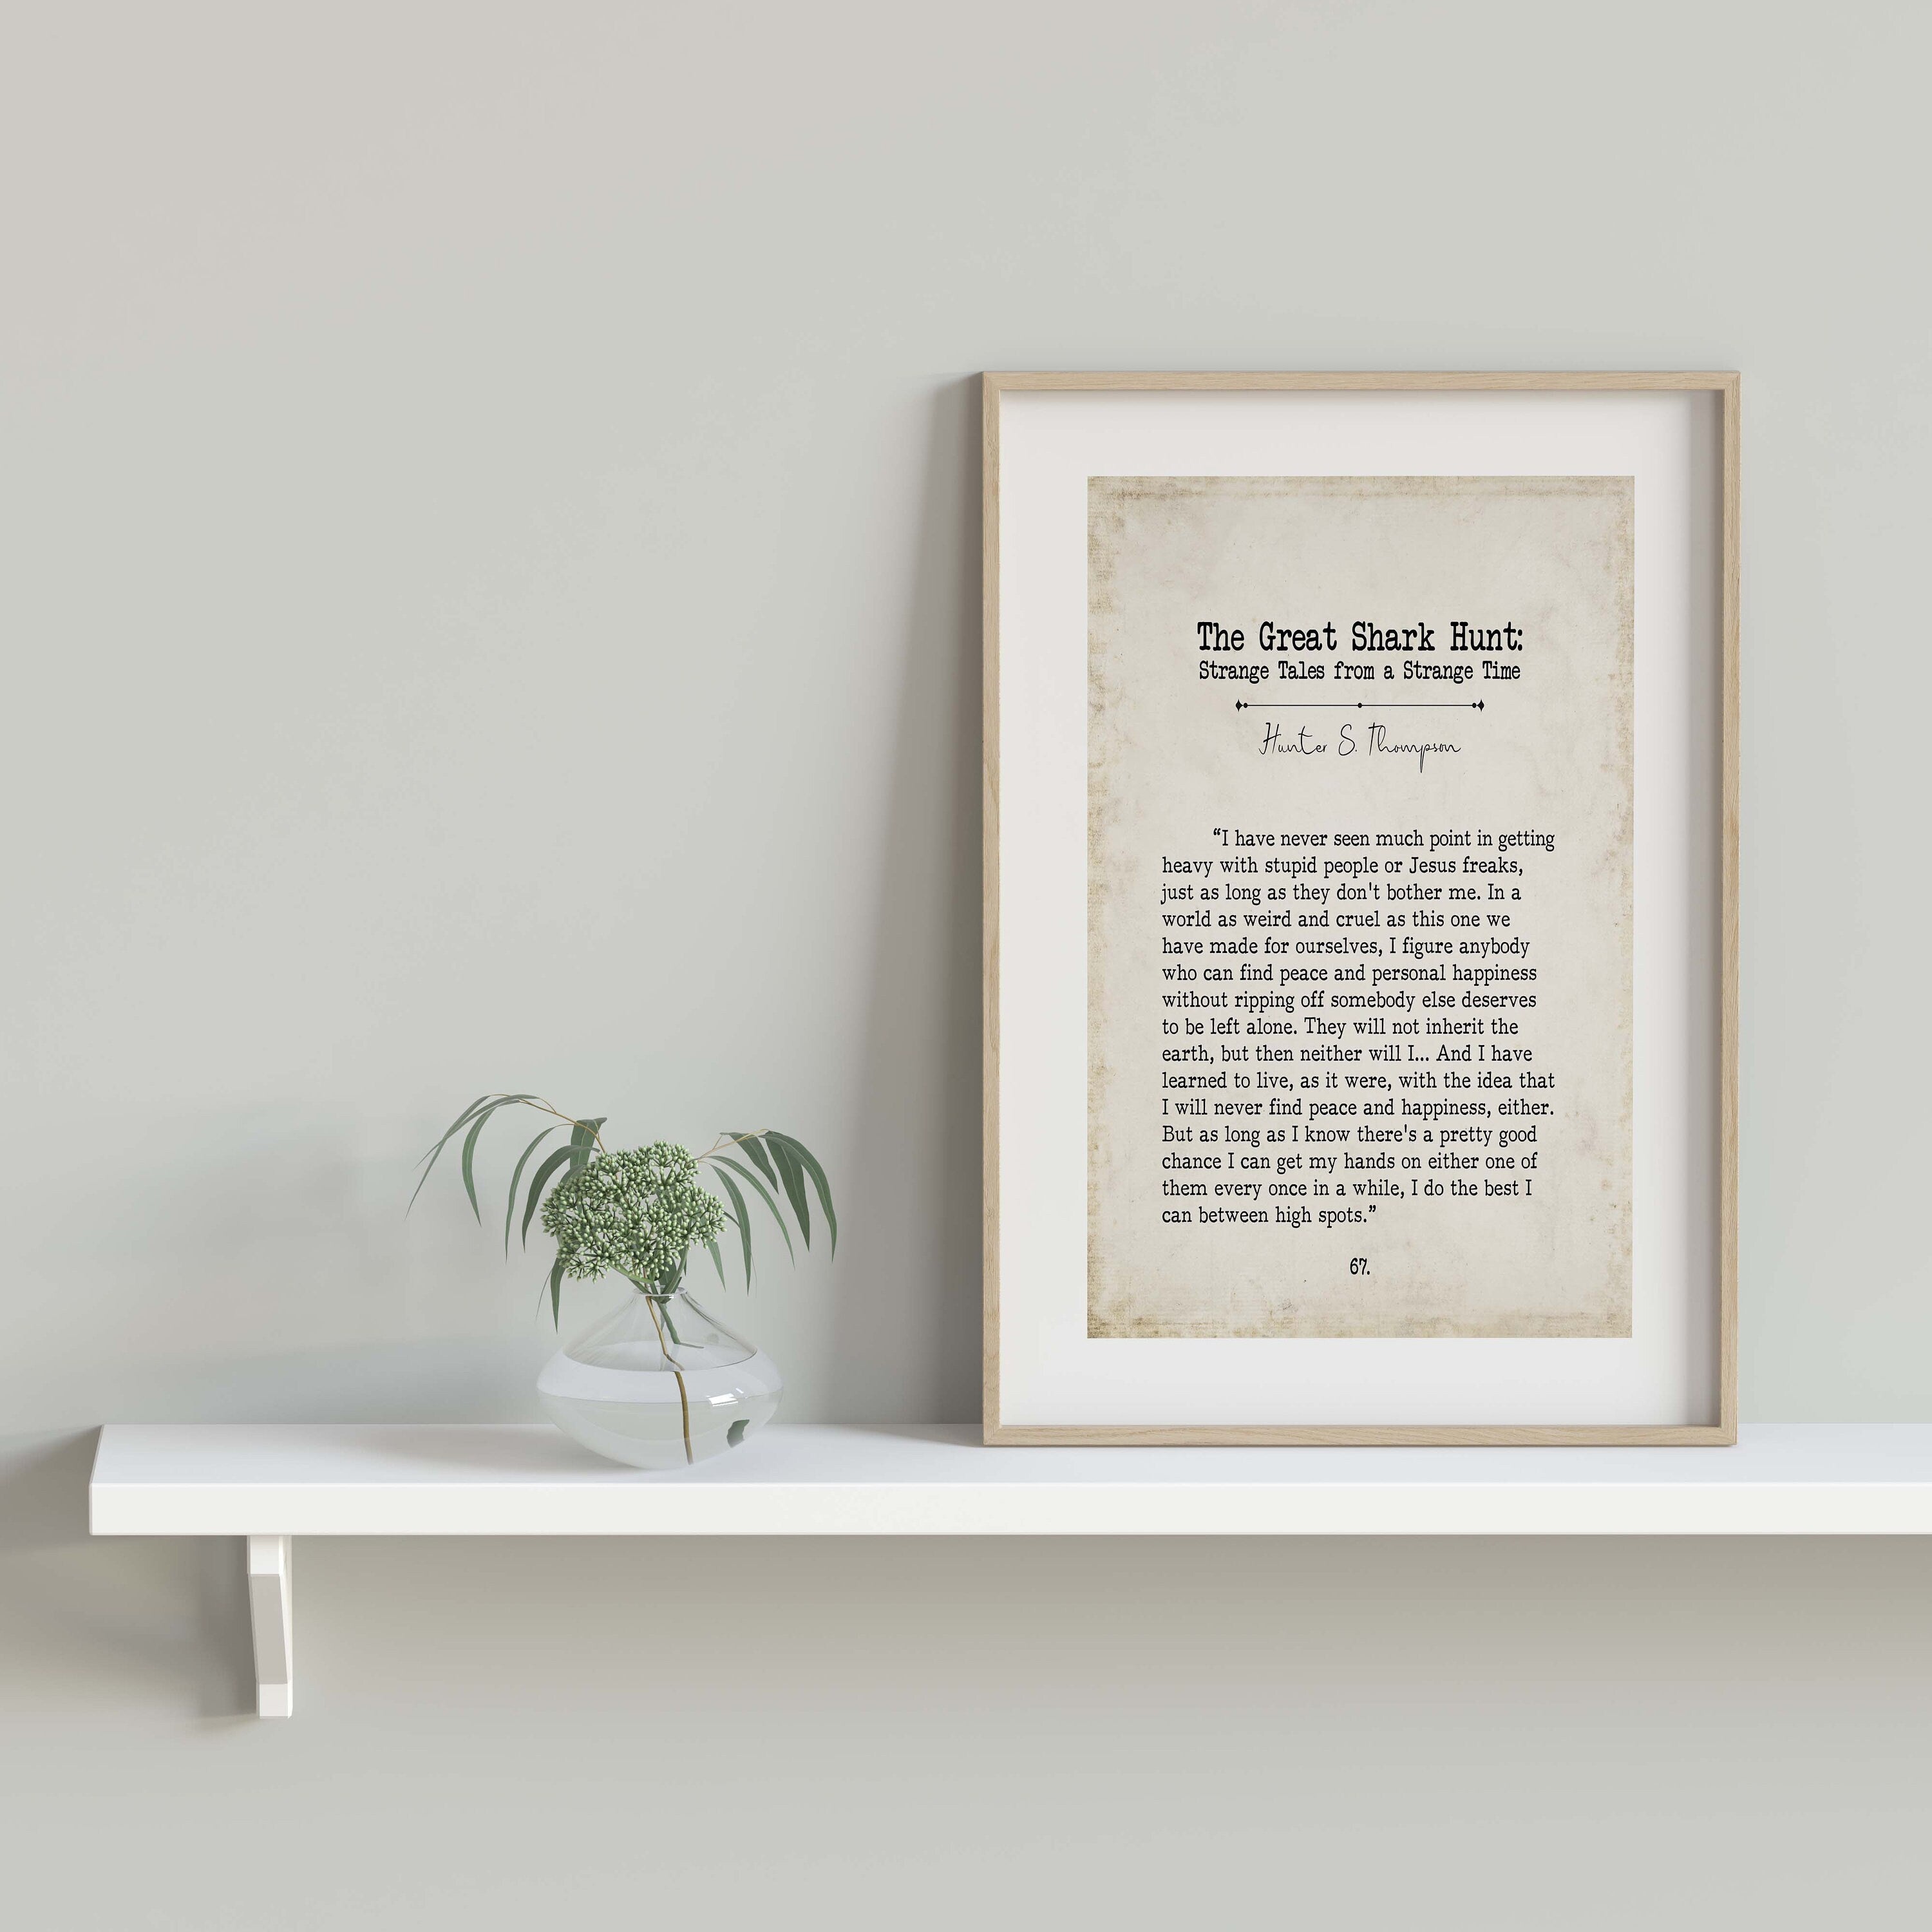 Hunter S Thompson Book Page Inspirational Wall Art, The Great Shark Hunt Quote Vintage Style Print Wall Decor